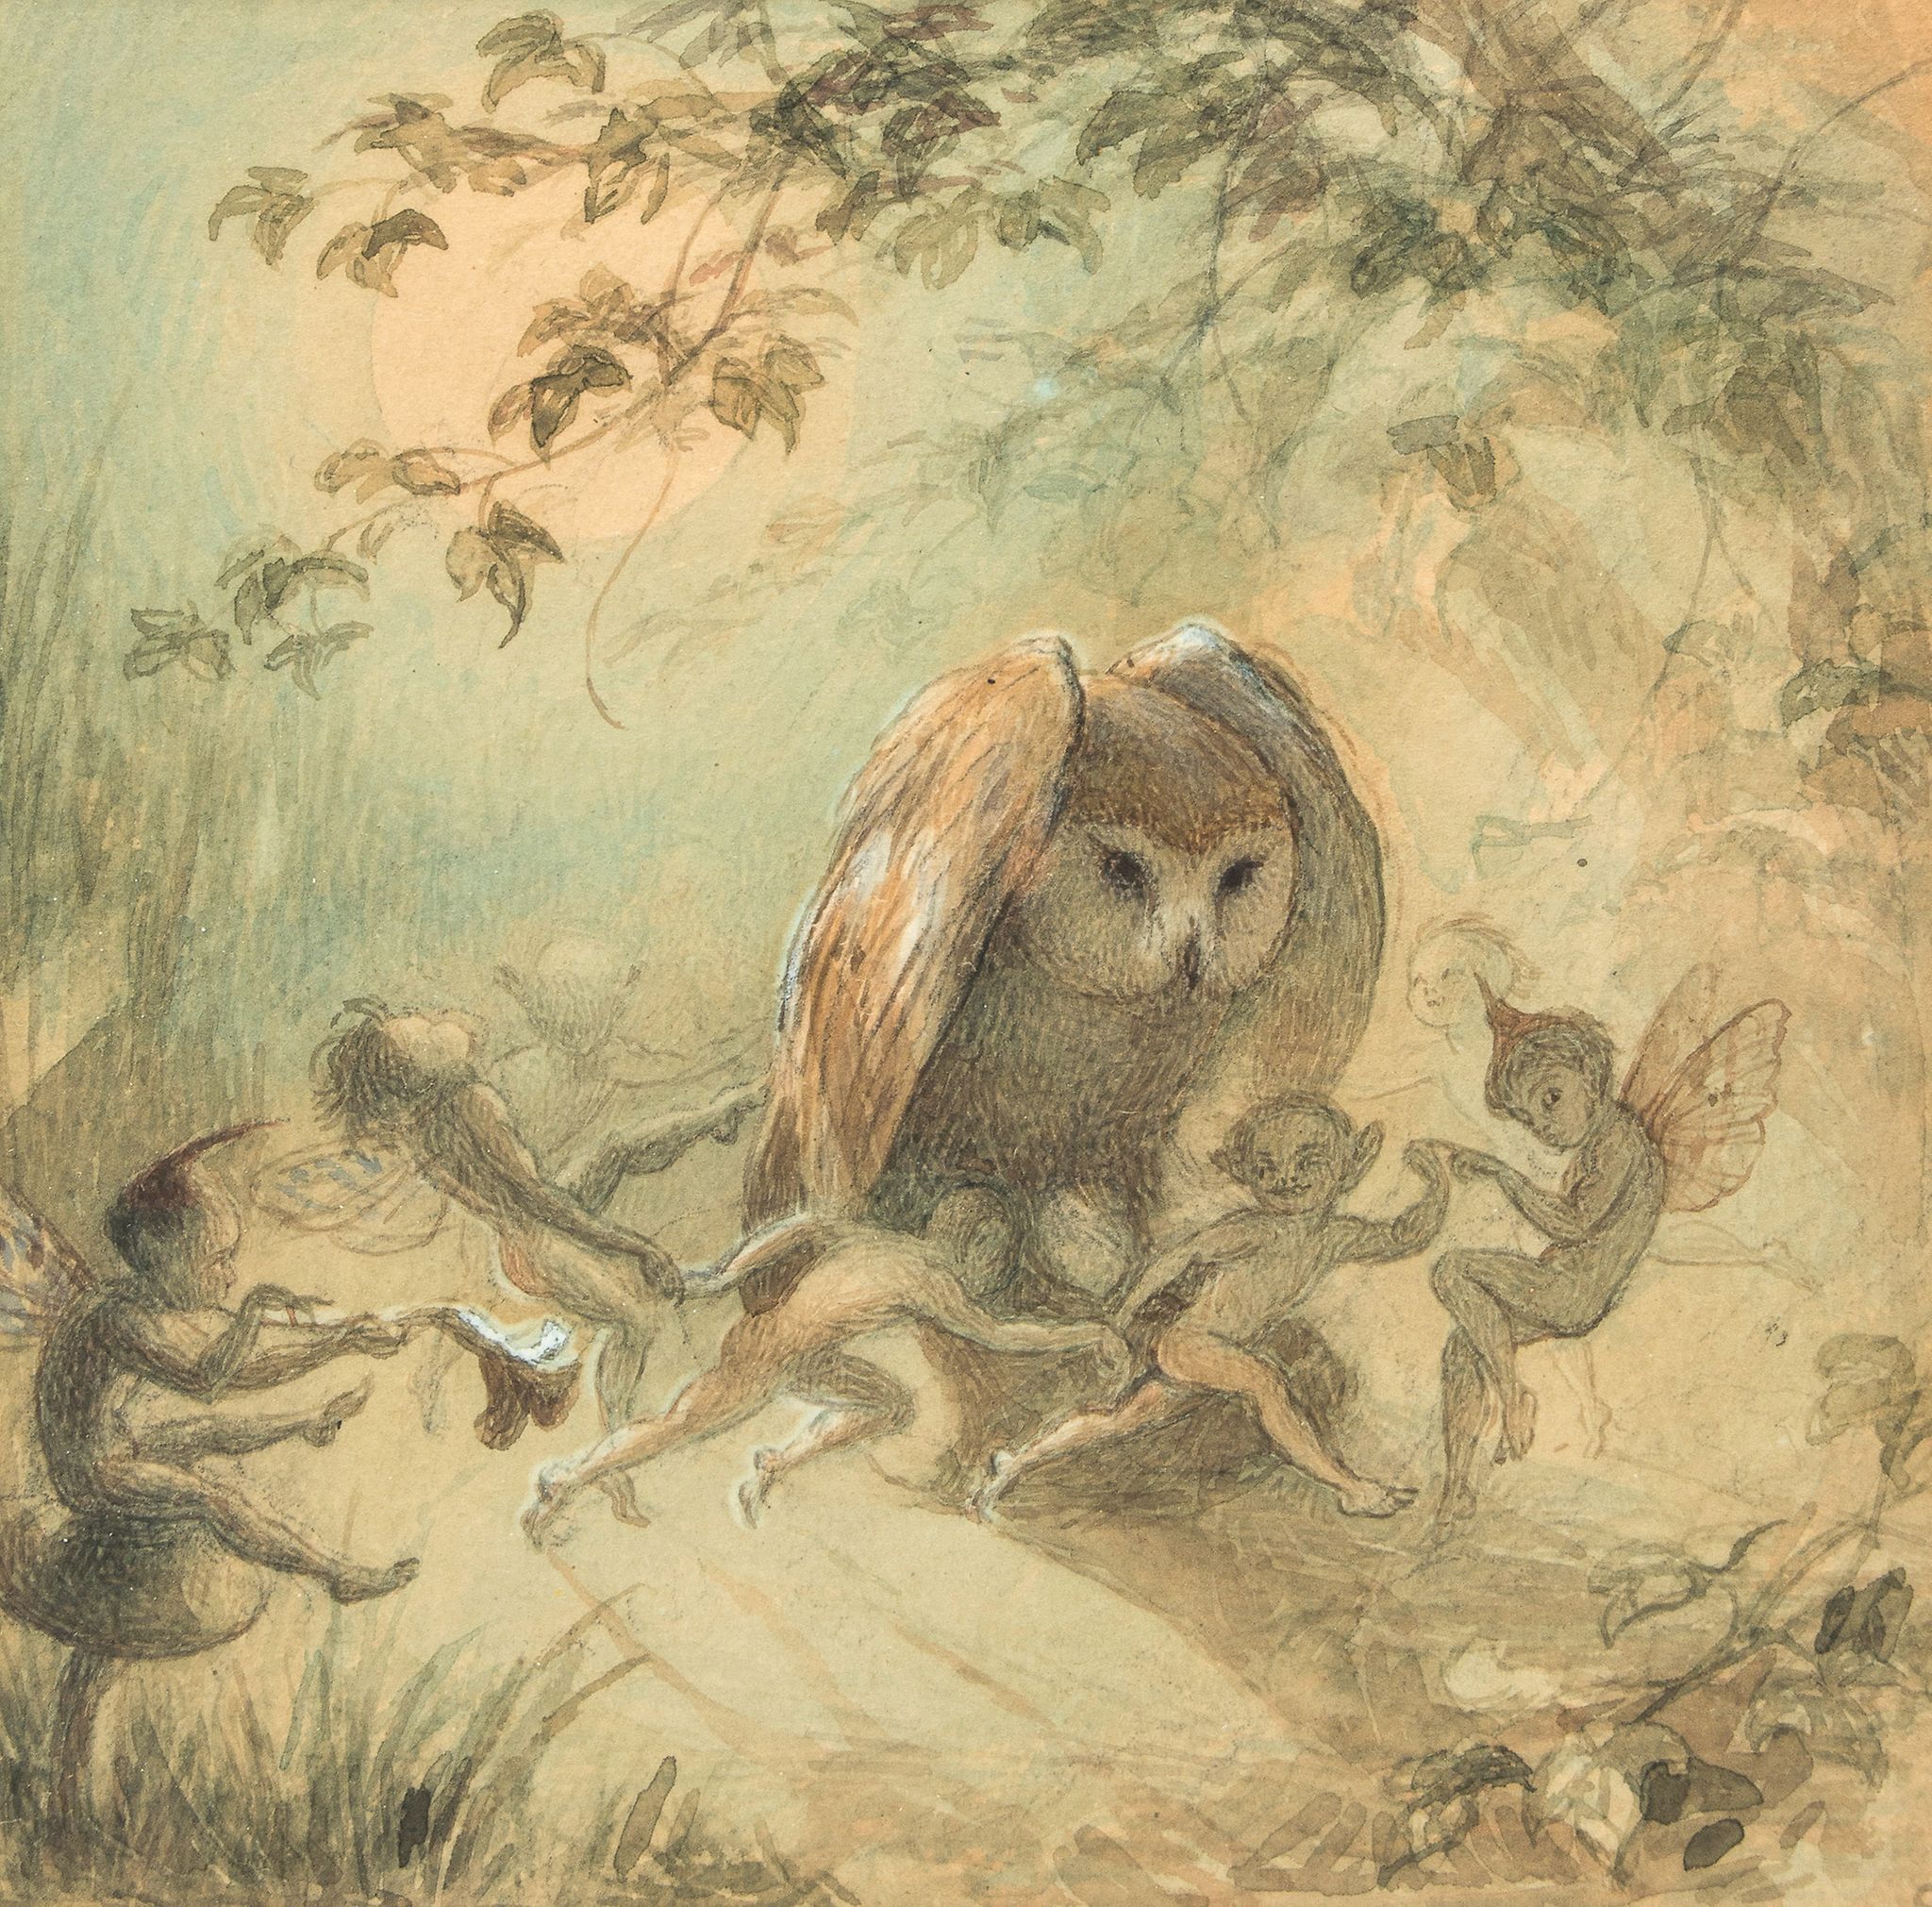 Doyle (Richard) - 'The Owl and the Fairies',  original pen, ink and wash drawing, initialled by